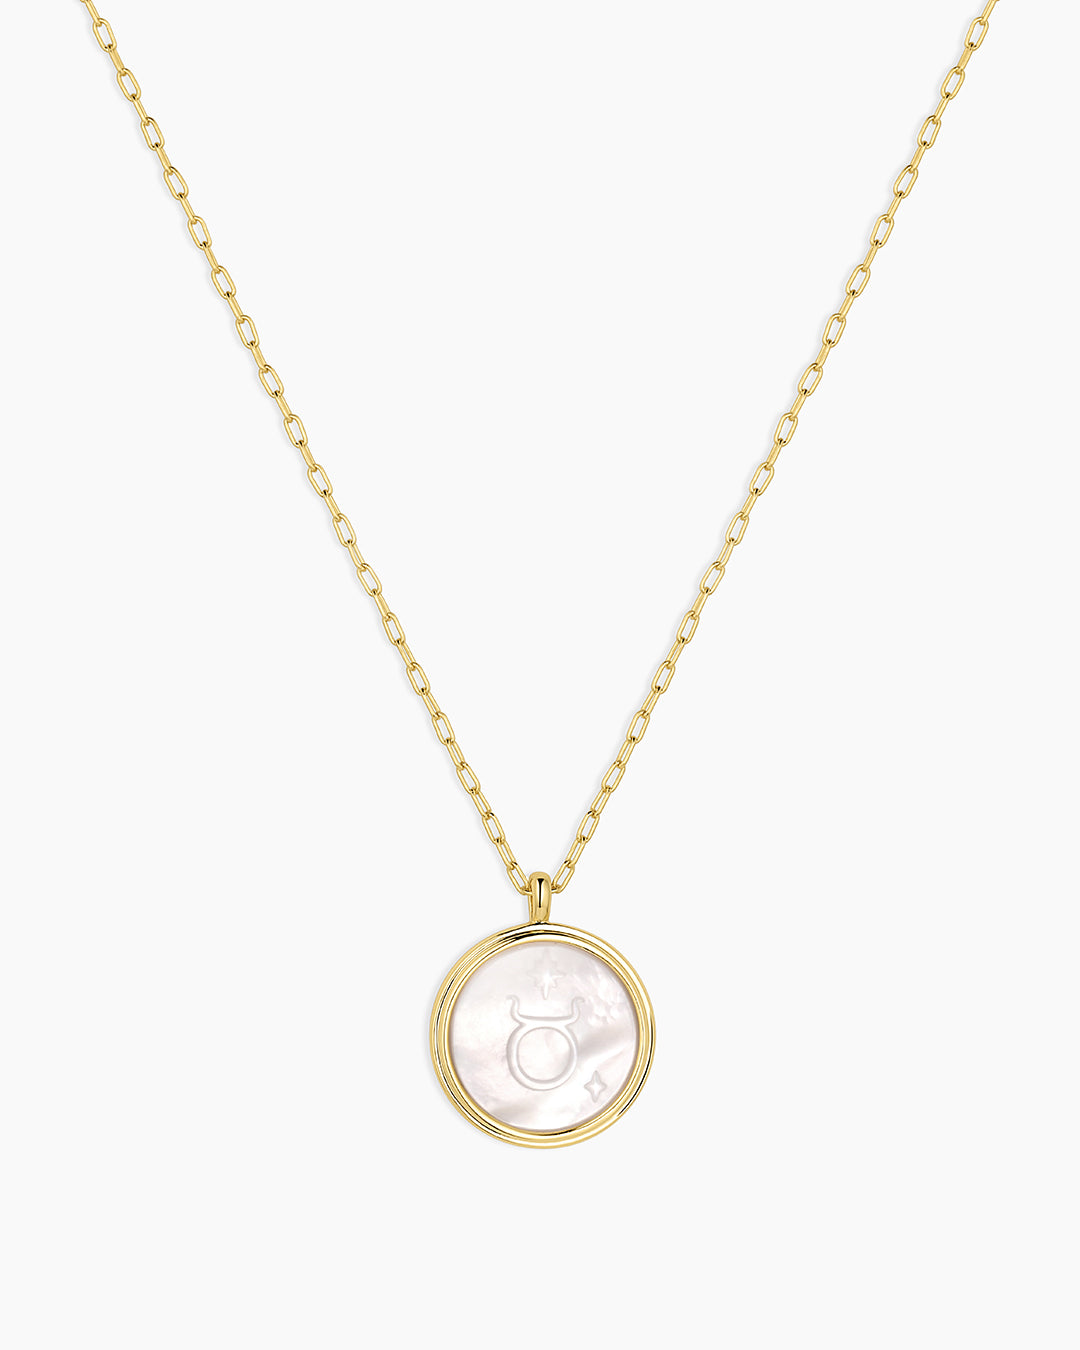 Zodiac Necklace - Gemini, Astrology Coin Necklace, Gemini Necklace || option::Gold Plated, Taurus